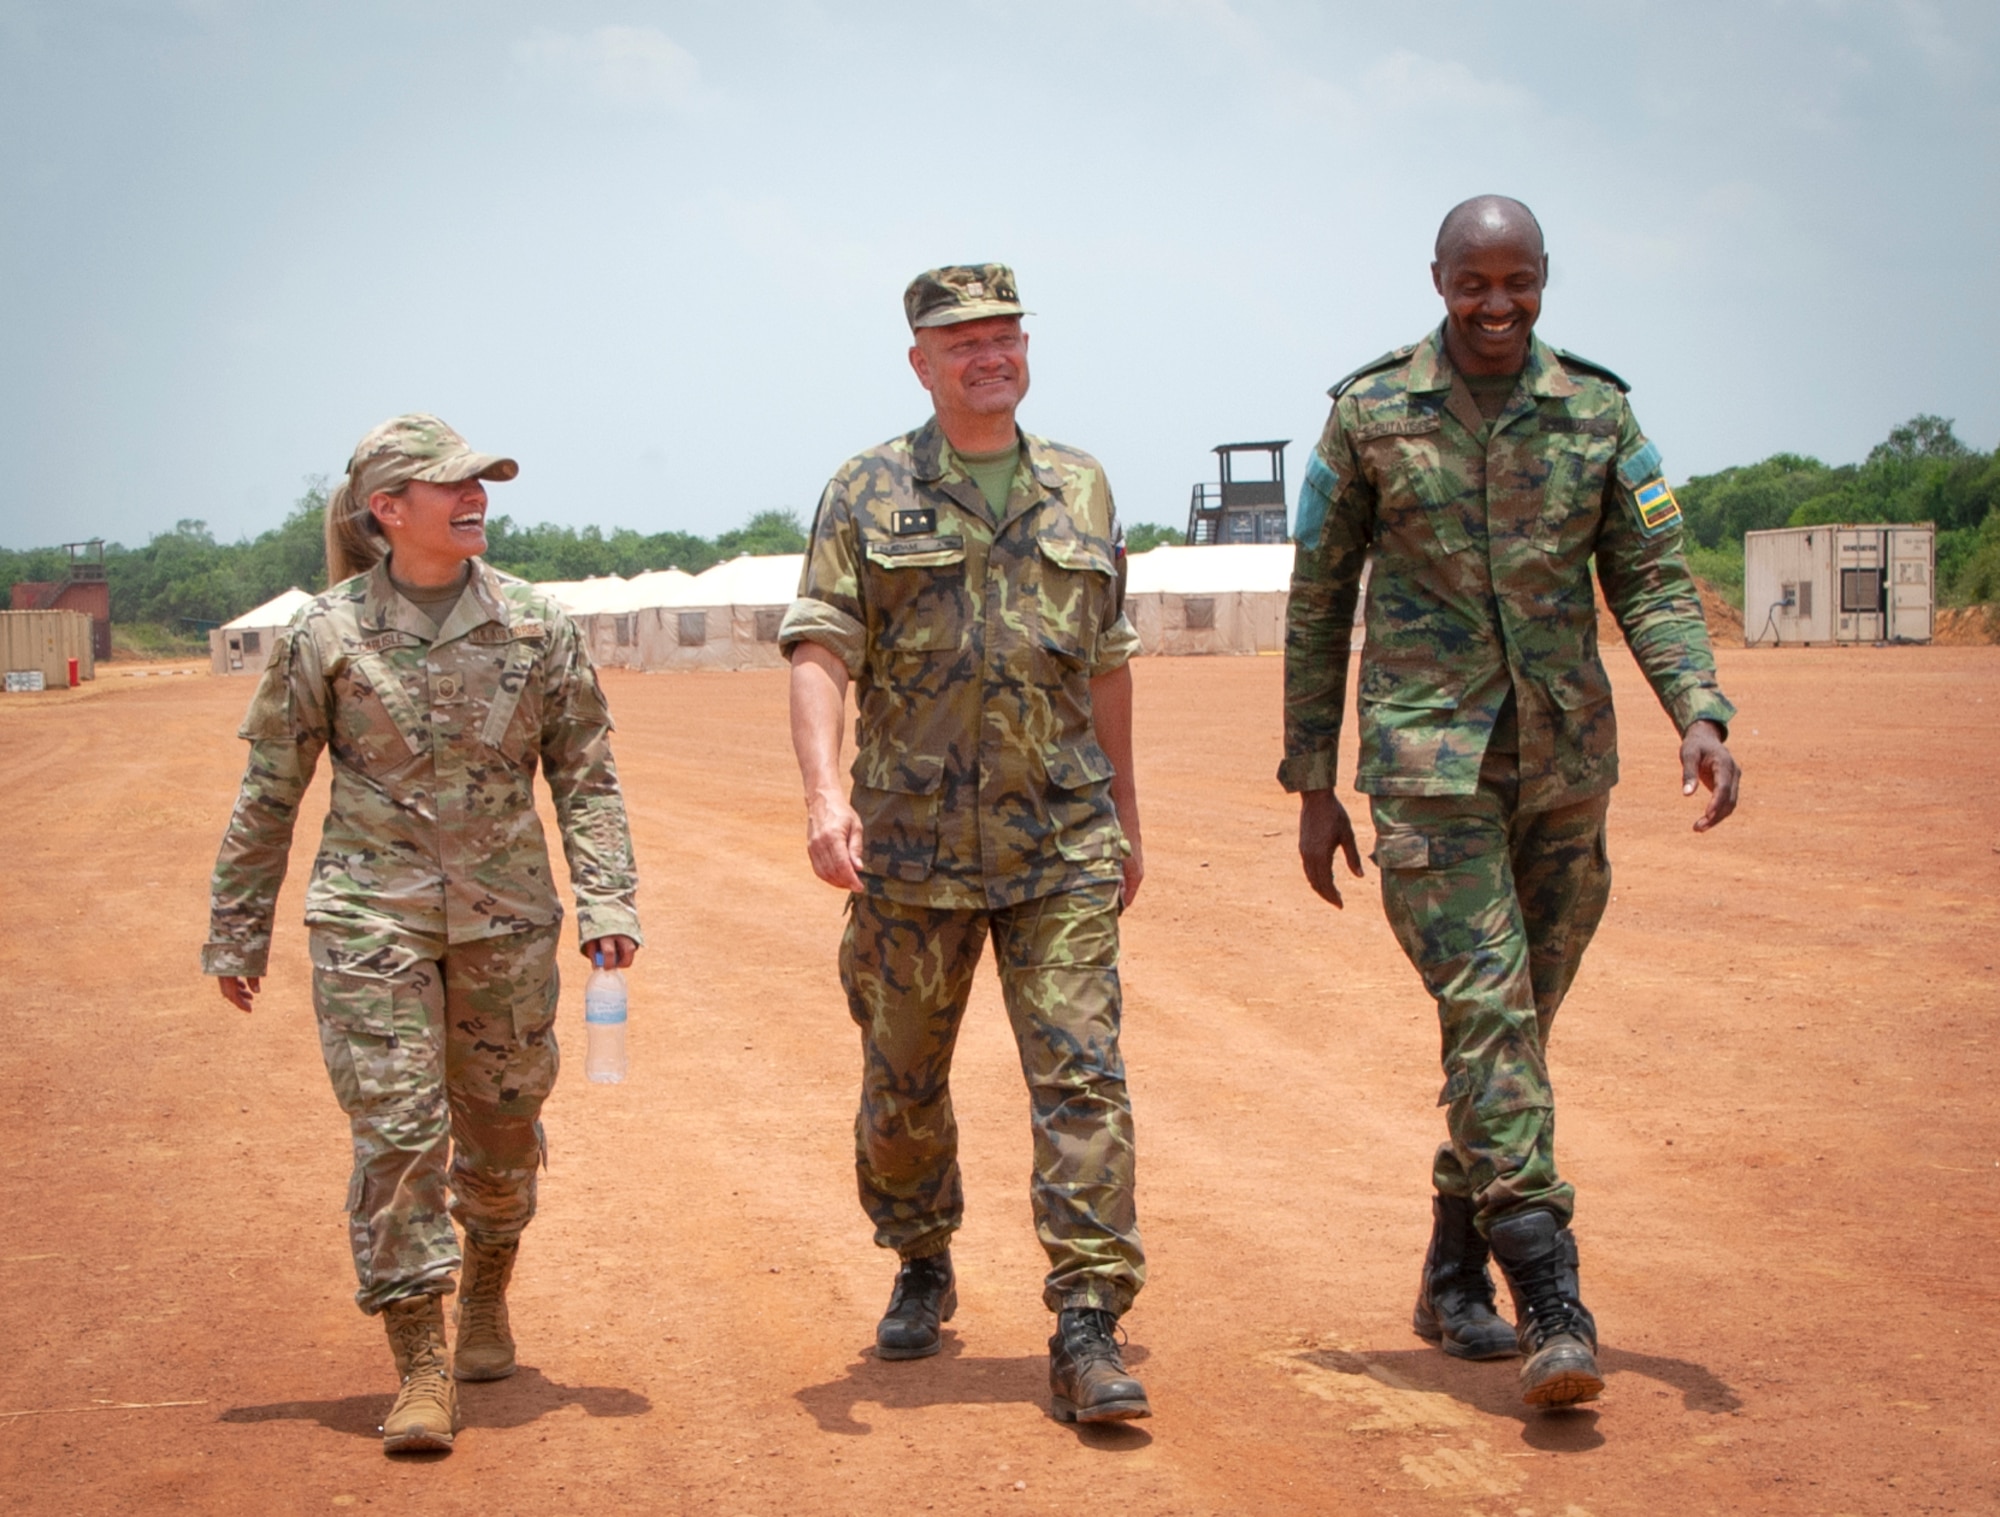 From left, Nebraska Air National Guard Maj. Angela Ling, Lt. Col. Adam Miroslav of the Czech Republic, and Rwandan Defense Force Maj. B. Rutayisire chat while walking across the hospital training site at Gako, Rwanda, March 16, 2022. The three were participating in a medical/engineering exchange exercise conducted in concert with the new State Partnership Program relationship between the Nebraska National Guard and the Rwandan Defense Force.